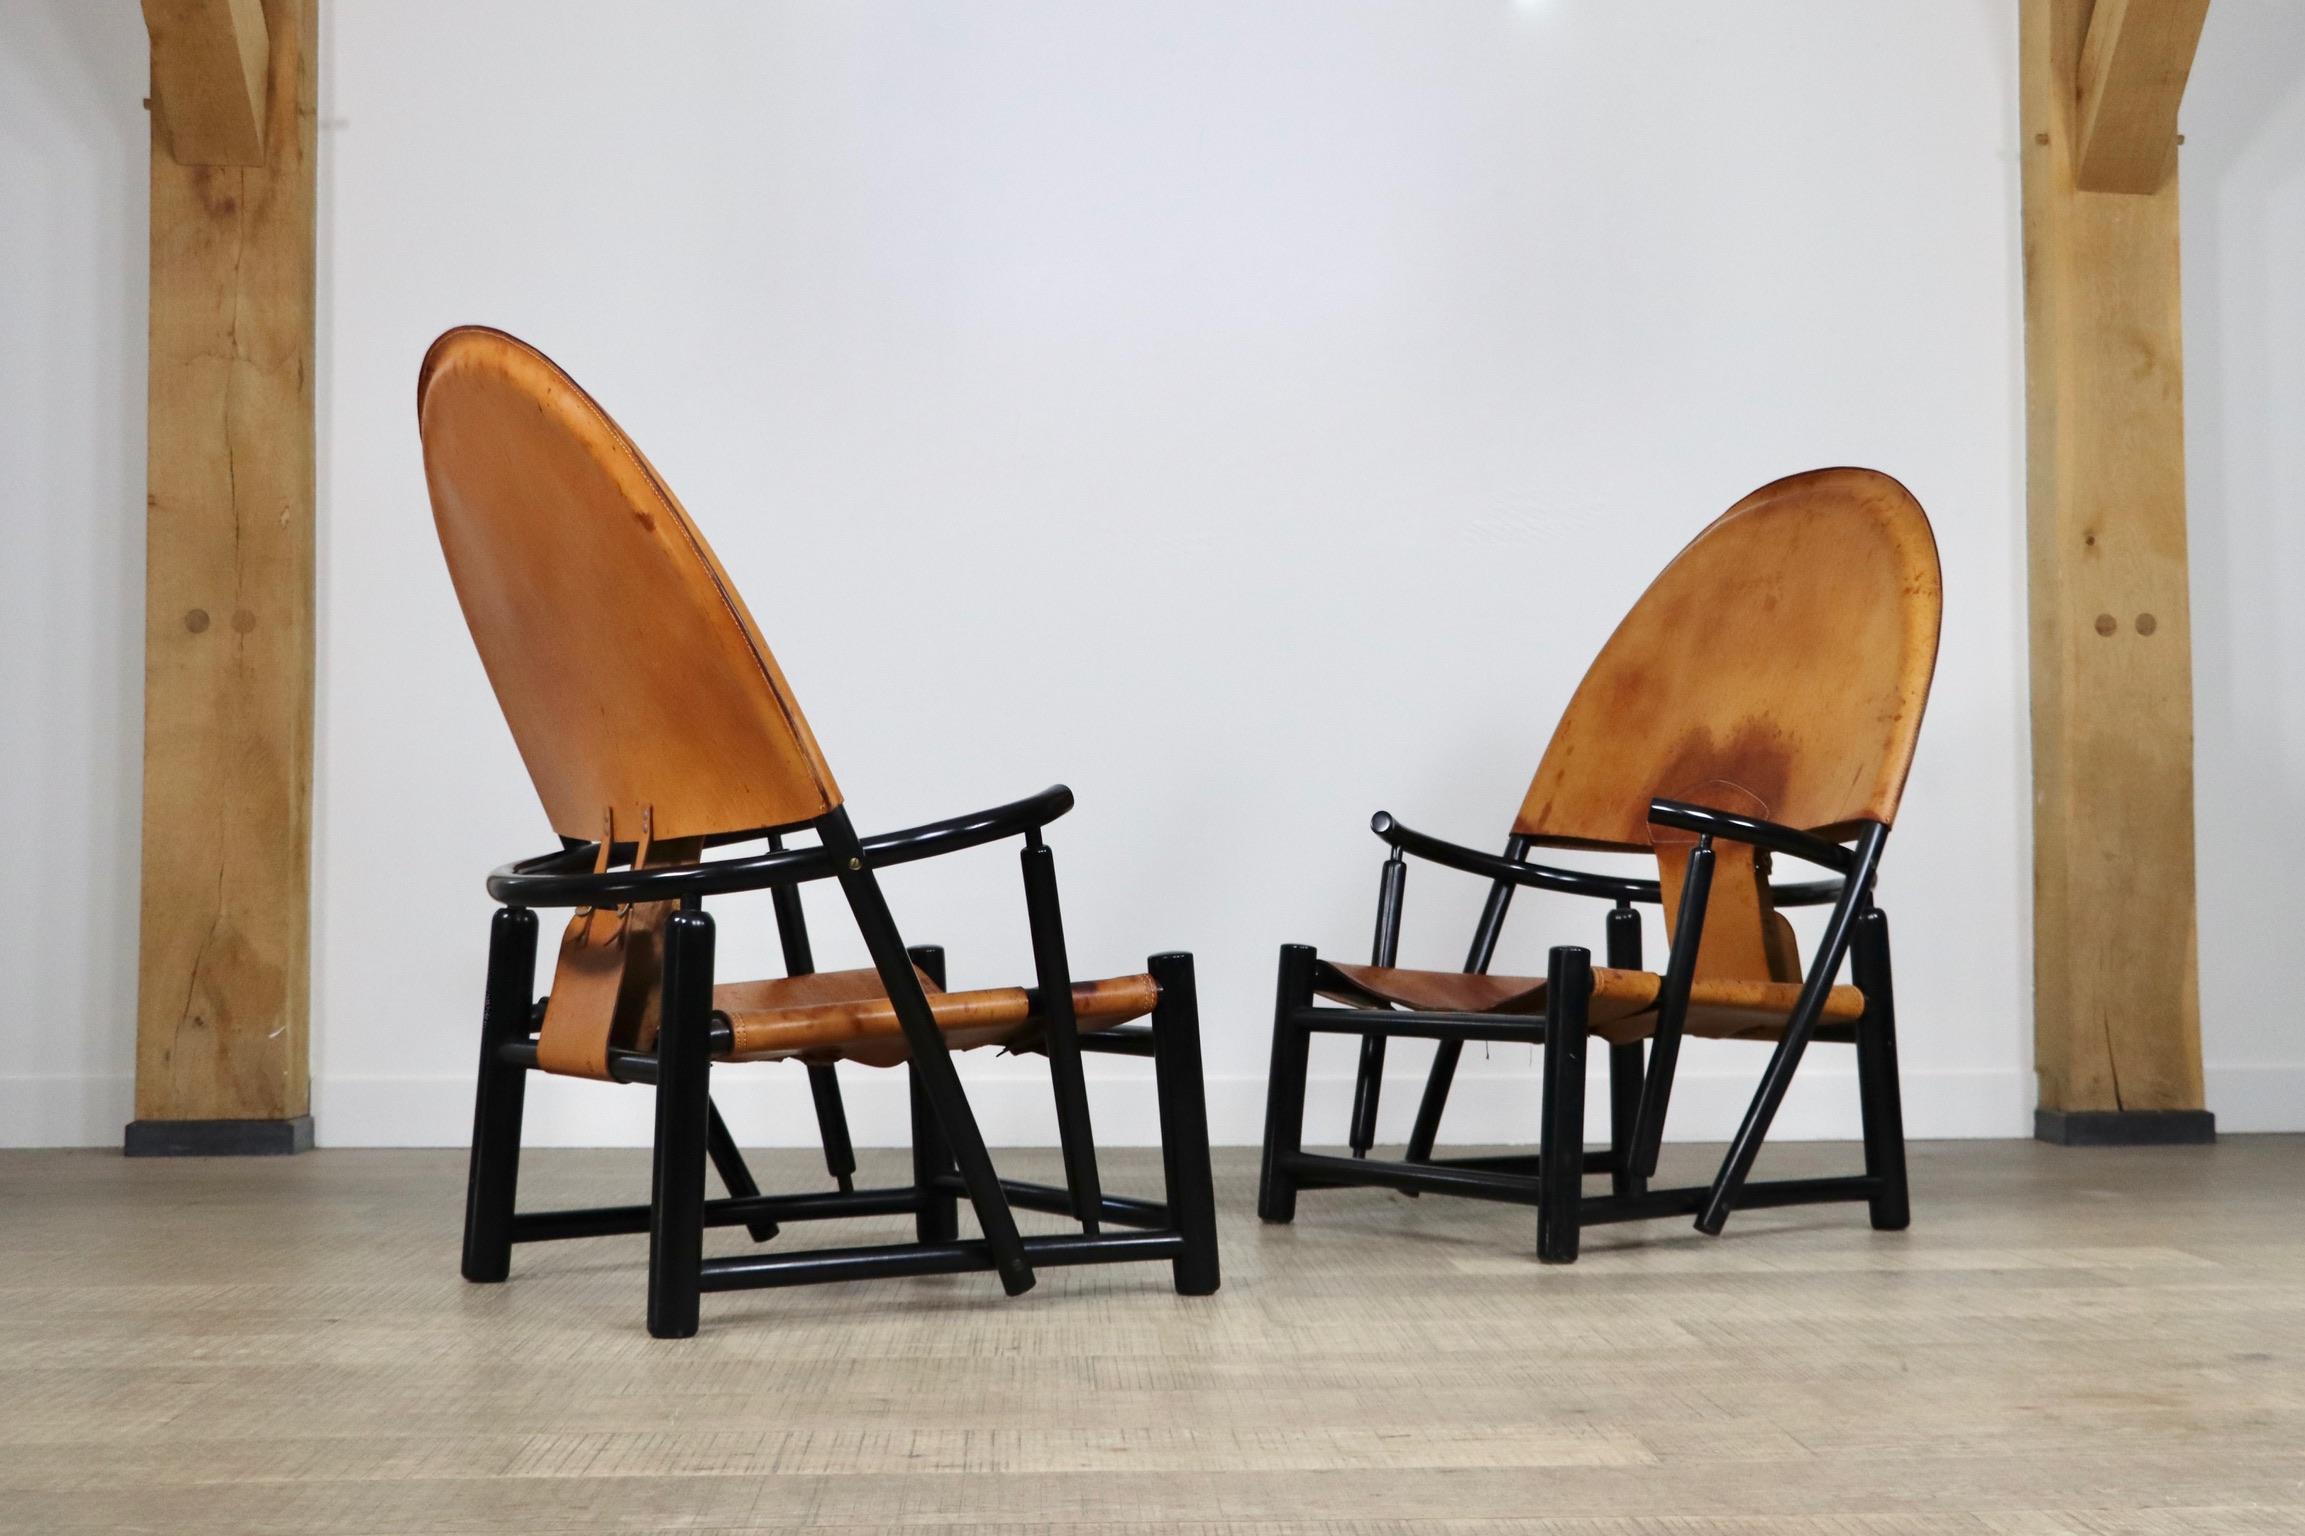 Pair of G23 Hoop chairs by Piero Palange and Werther Toffoloni for Germa 2